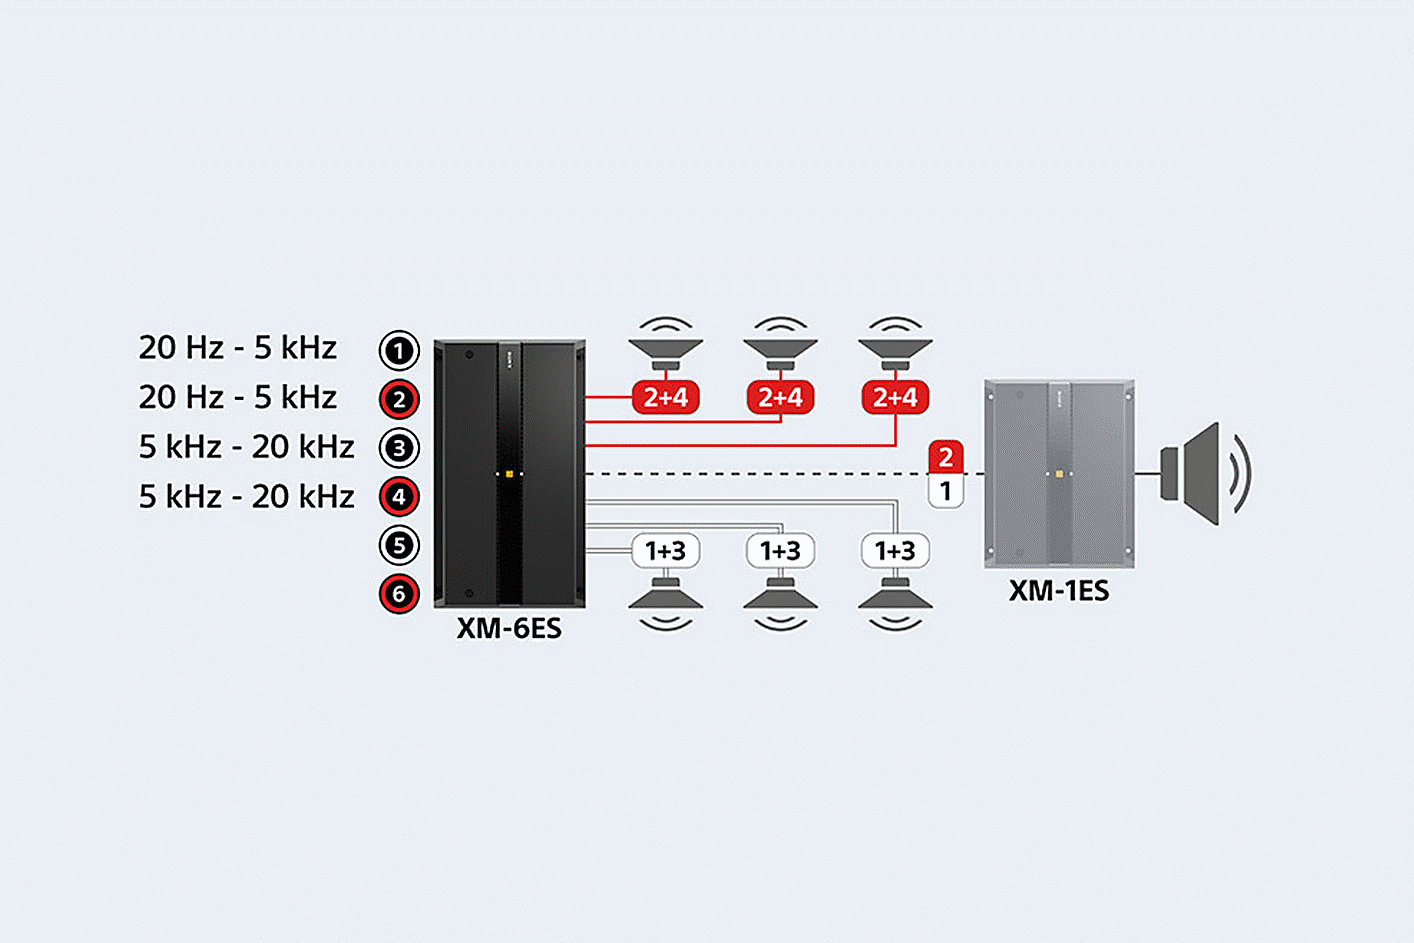 Diagram of the XM-6ES connected to six speakers and a XM-1ES, sound settings are displayed next to ports 1, 2, 3 & 4